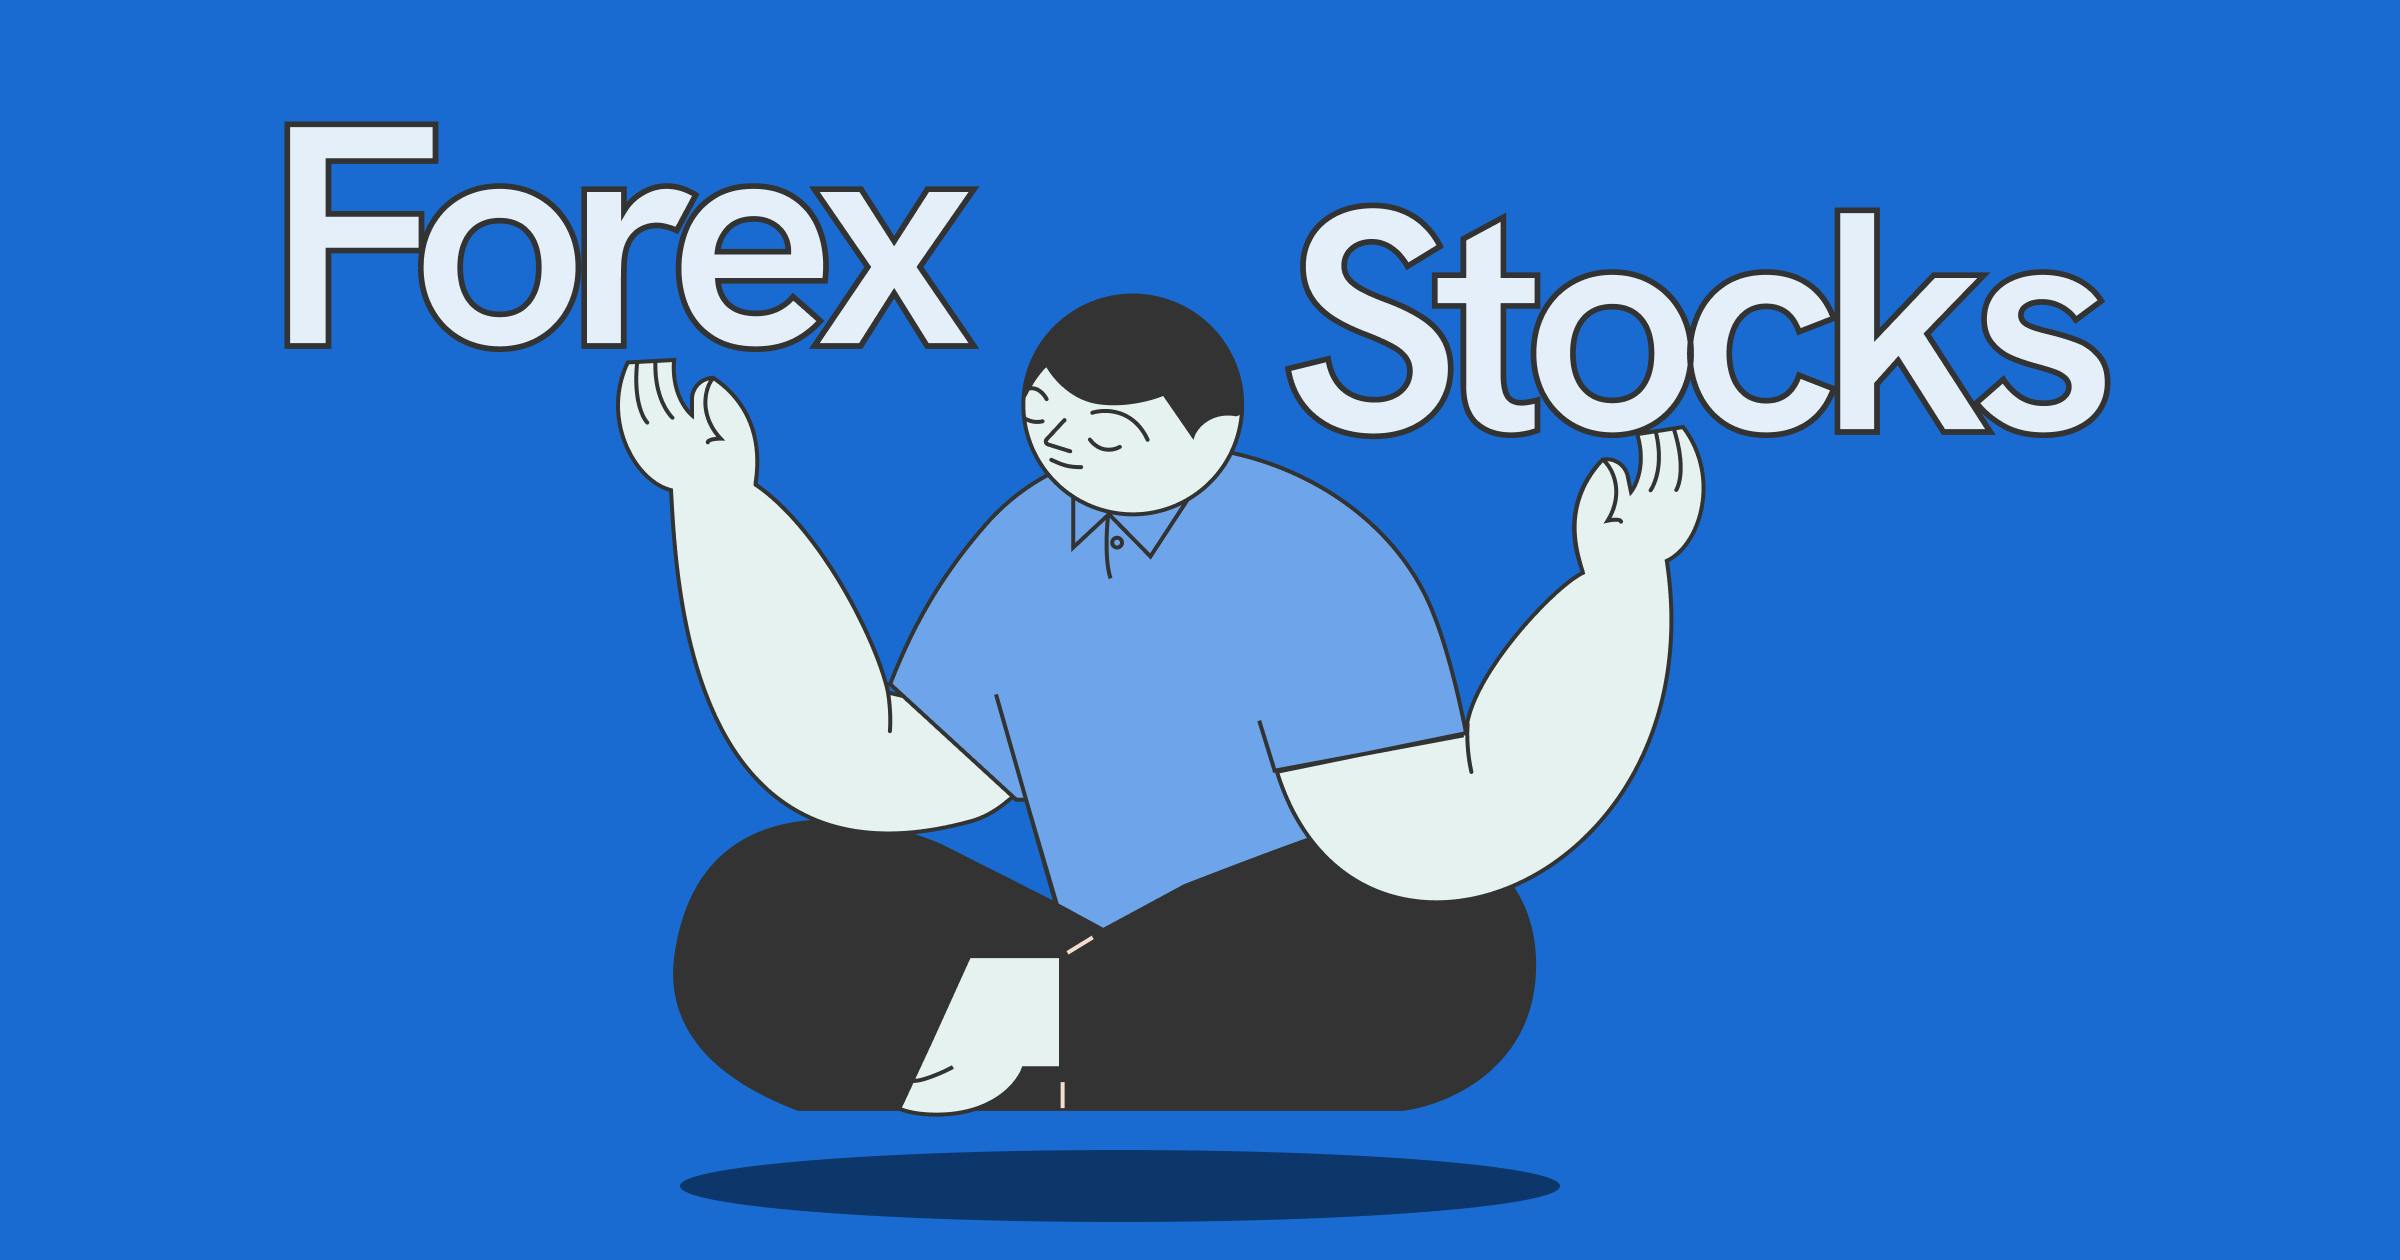 An illustrated man meditating and comparing on trading for forex vs. stock market